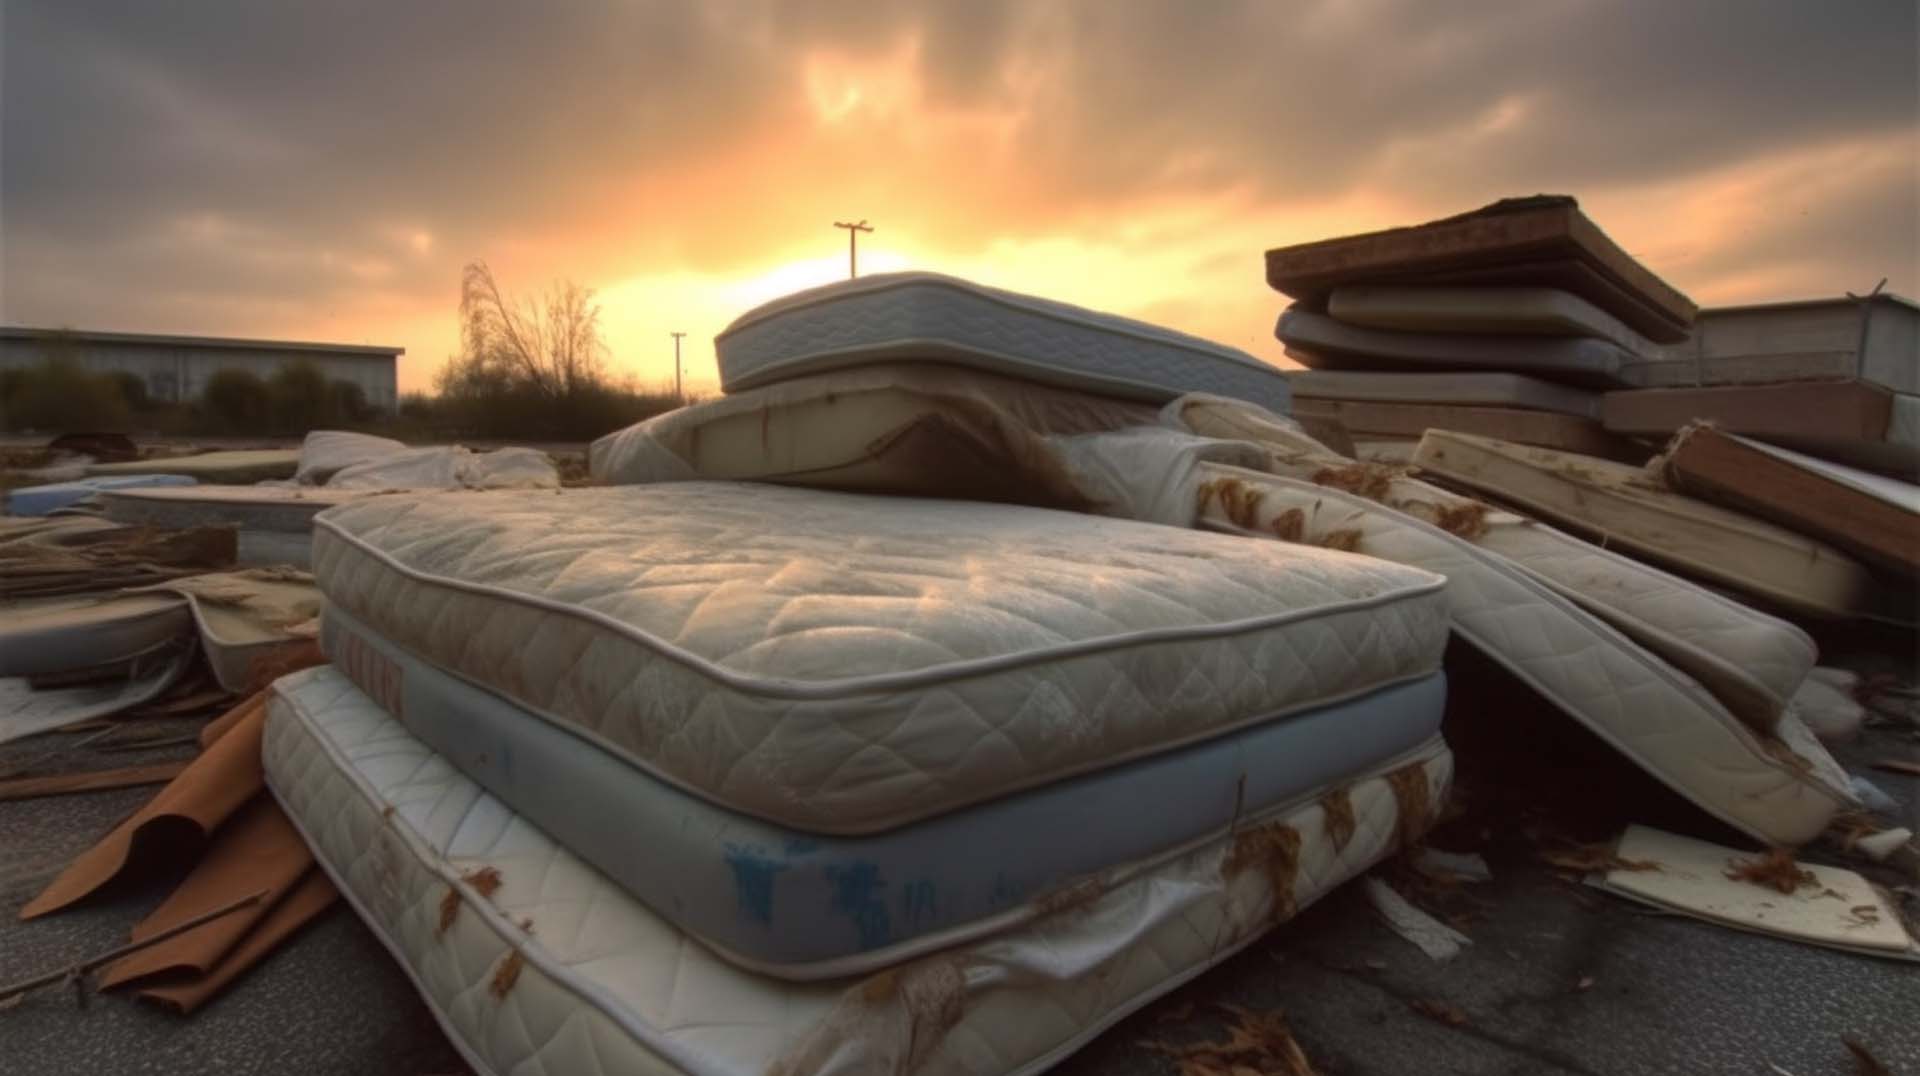 Mattress Recycling in Whitehorse